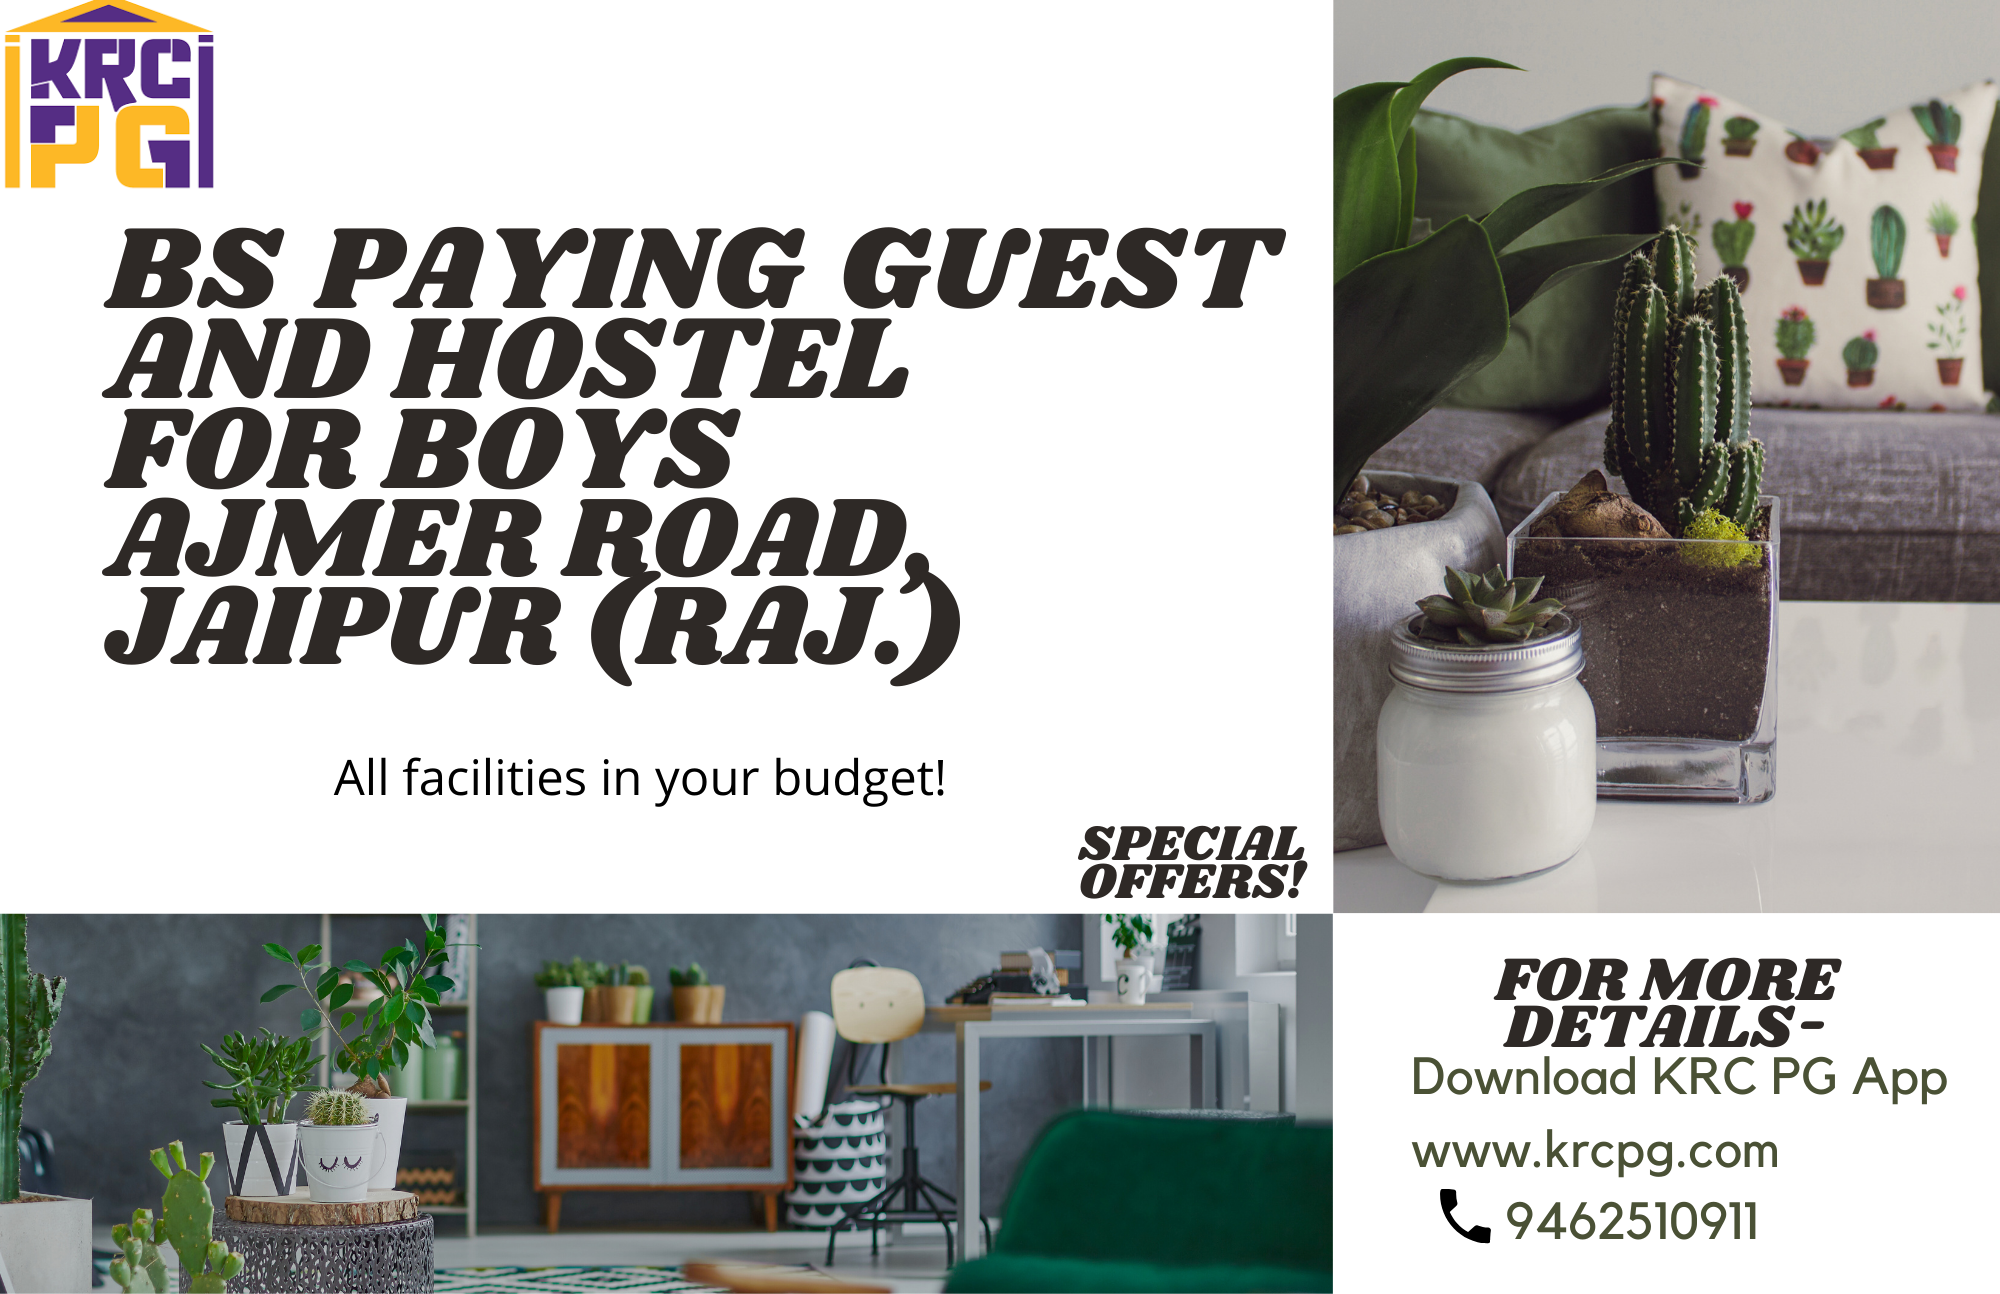 BS PAYING GUEST AND HOSTEL FOR BOYS, AJMER ROAD, JAIPUR